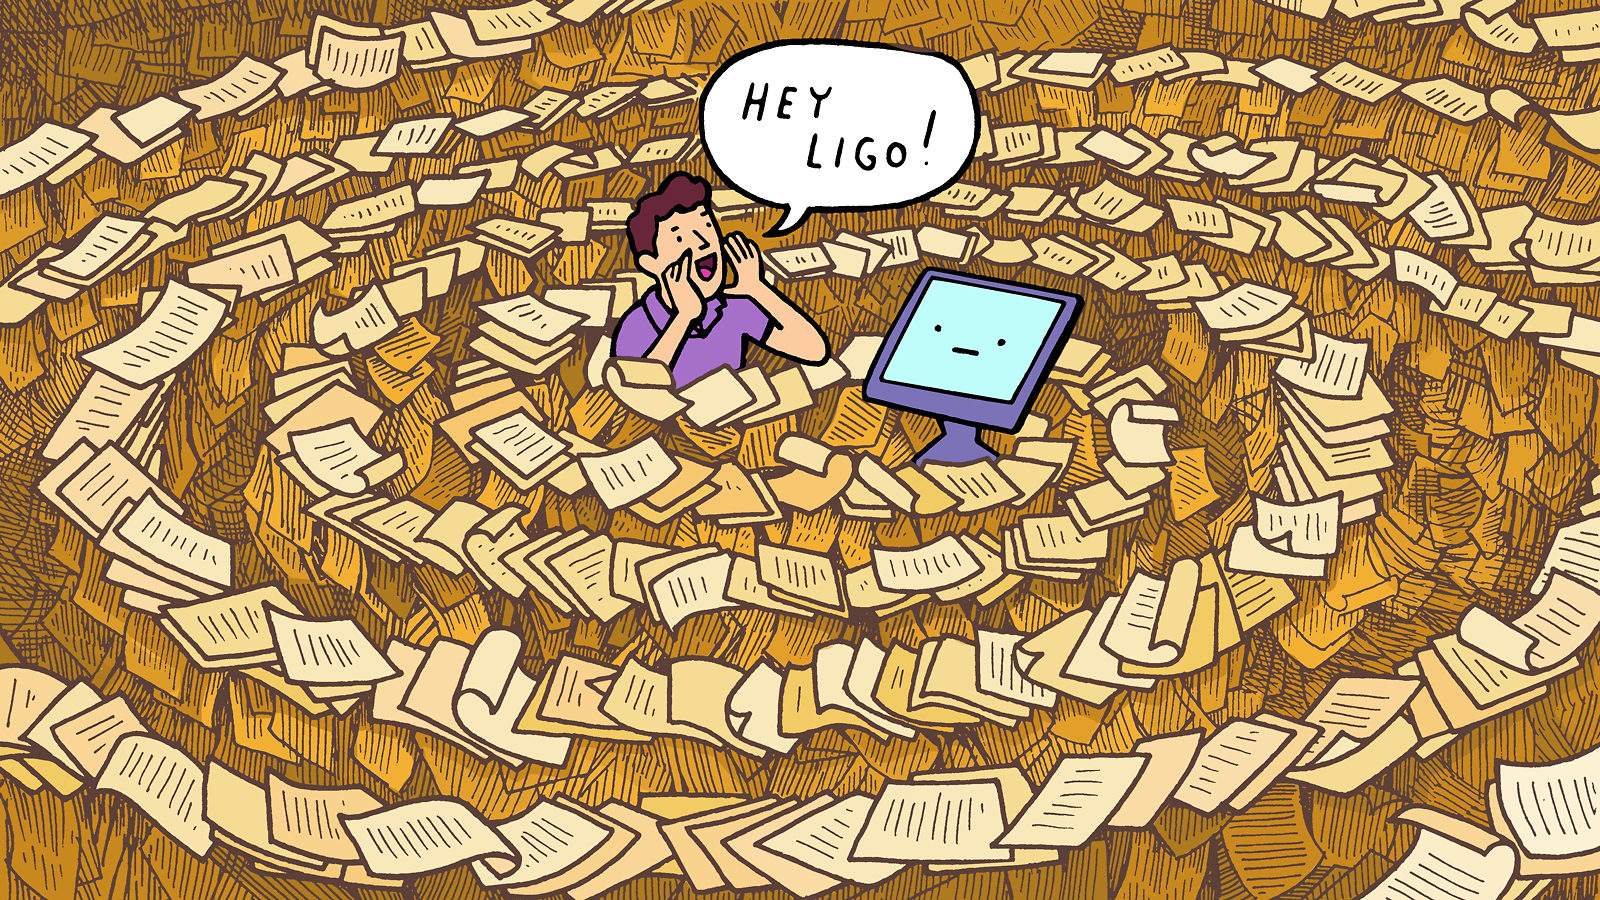 An illustration of a man surrounded by a swirl of paper shout's "Hey LIGO" at a computer